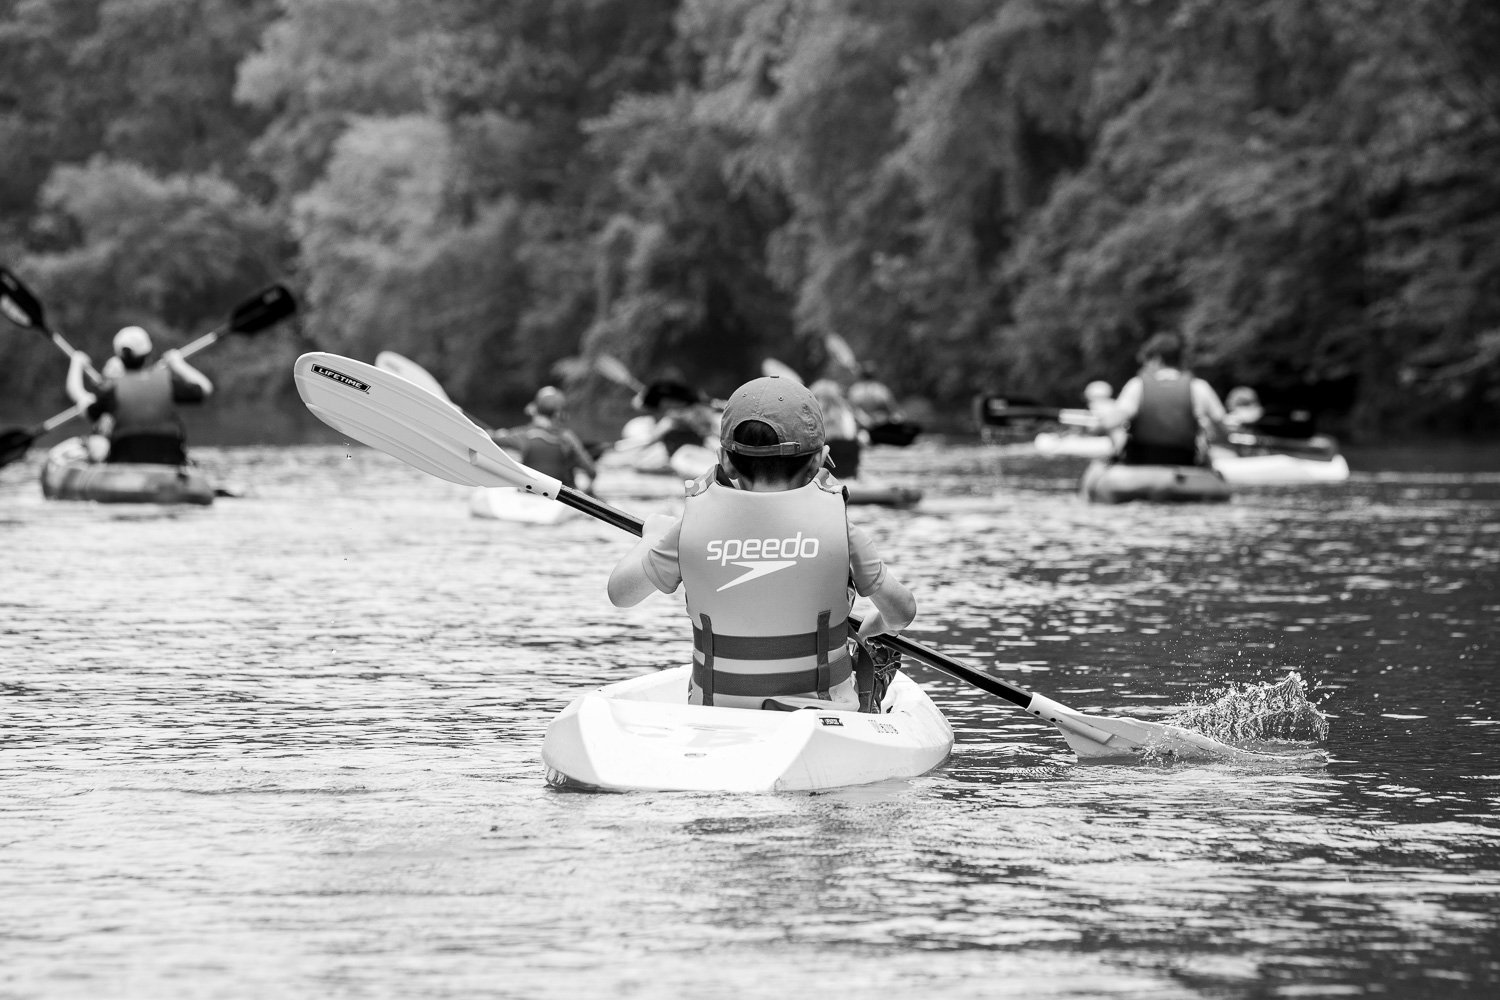 At CBI Camp: Journeys, a summer camp in Charlottesville, Virginia, a camper kayaks down the rivanna river